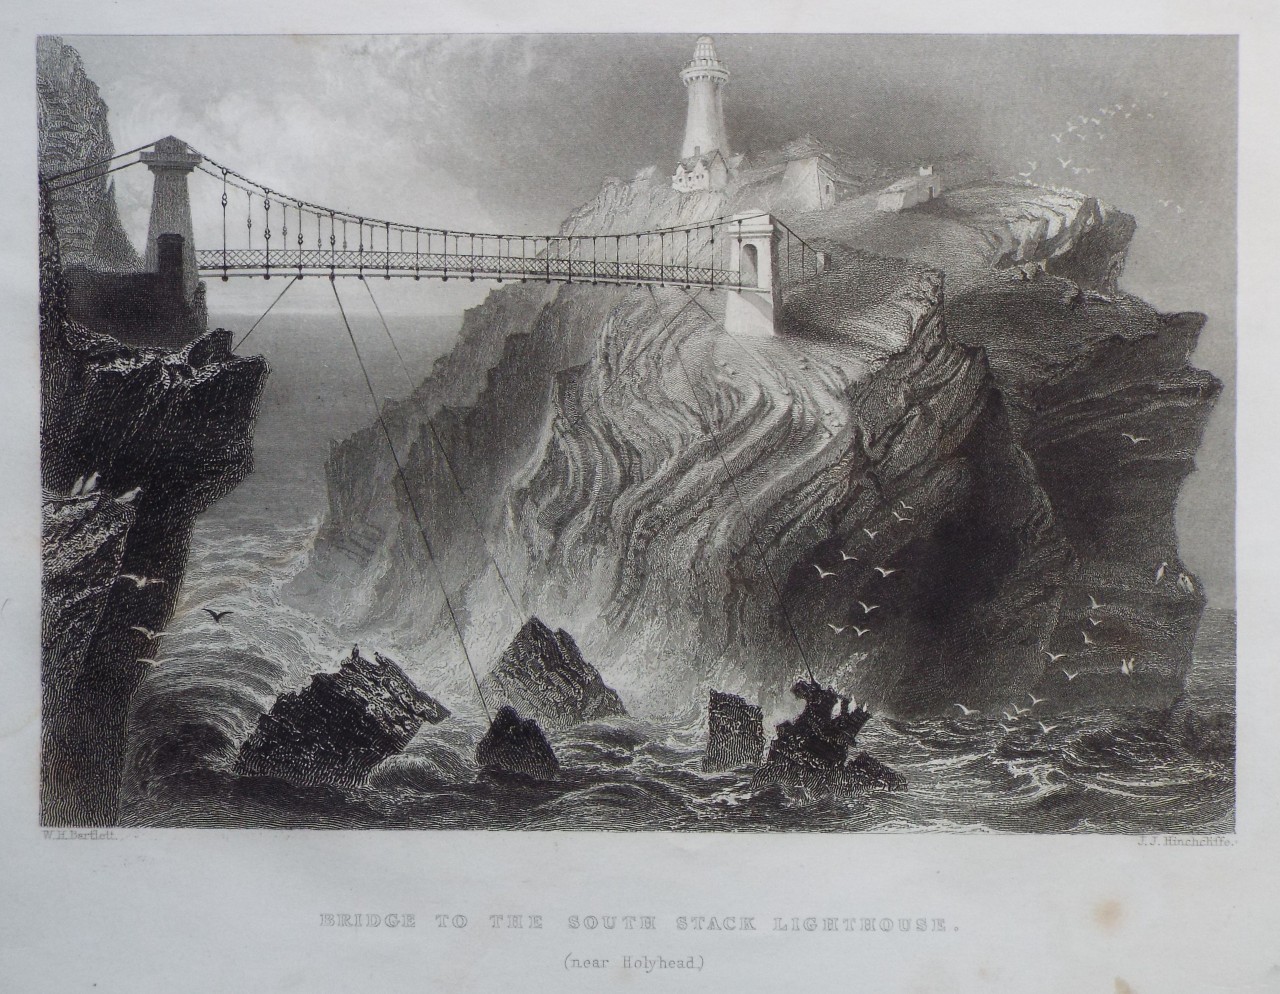 Print - Bridge to the South Stack Lighthouse. (near Holyhead.) - Hinchcliffe